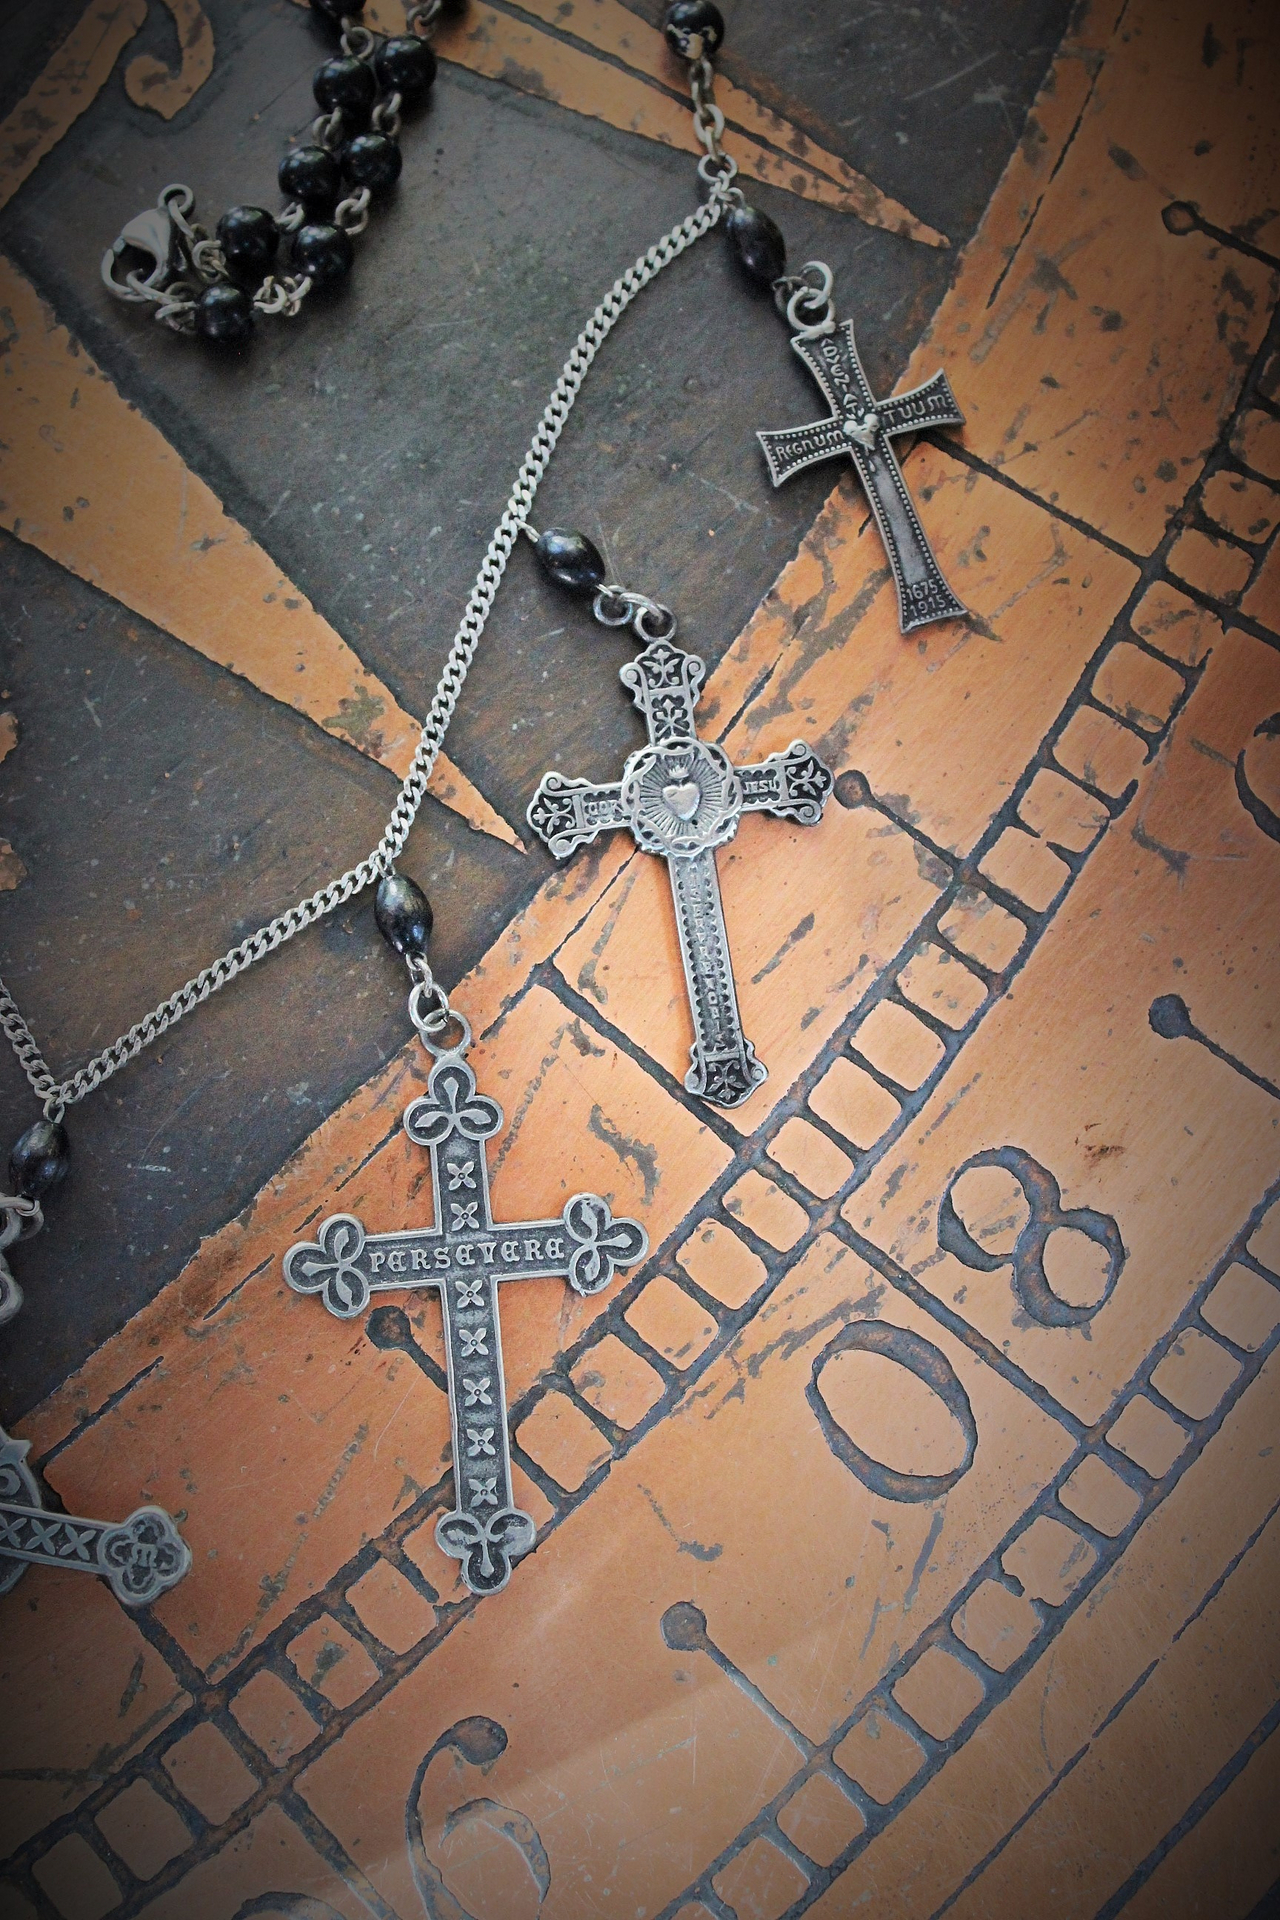 NEW! To Pray Necklace with 7 French Crosses, Antique Rosary Bead Fragments, Silver Chain